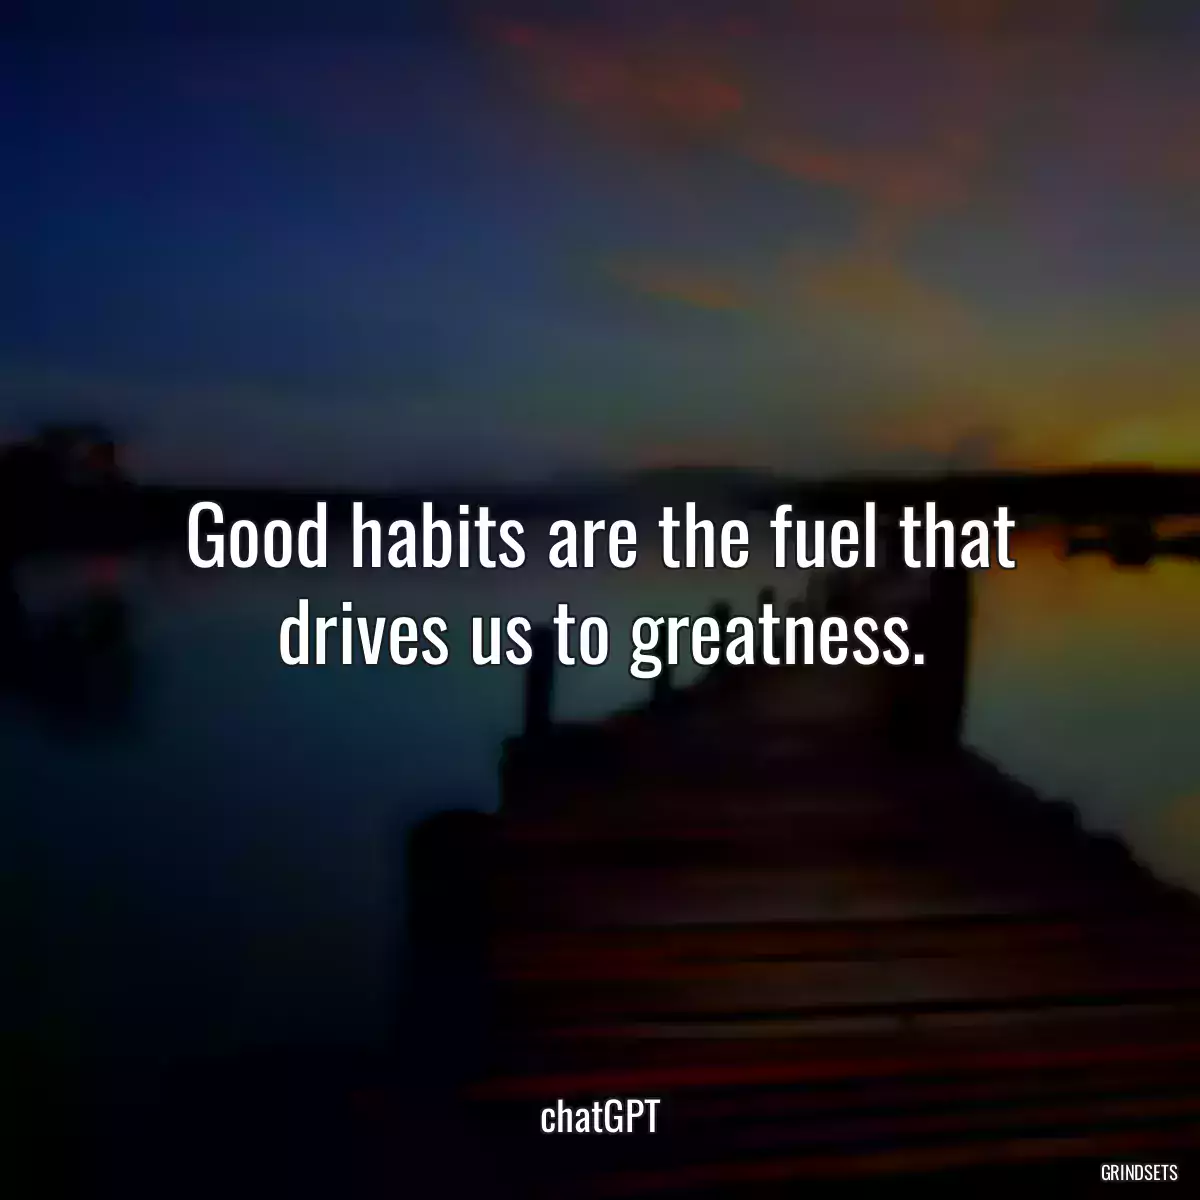 Good habits are the fuel that drives us to greatness.